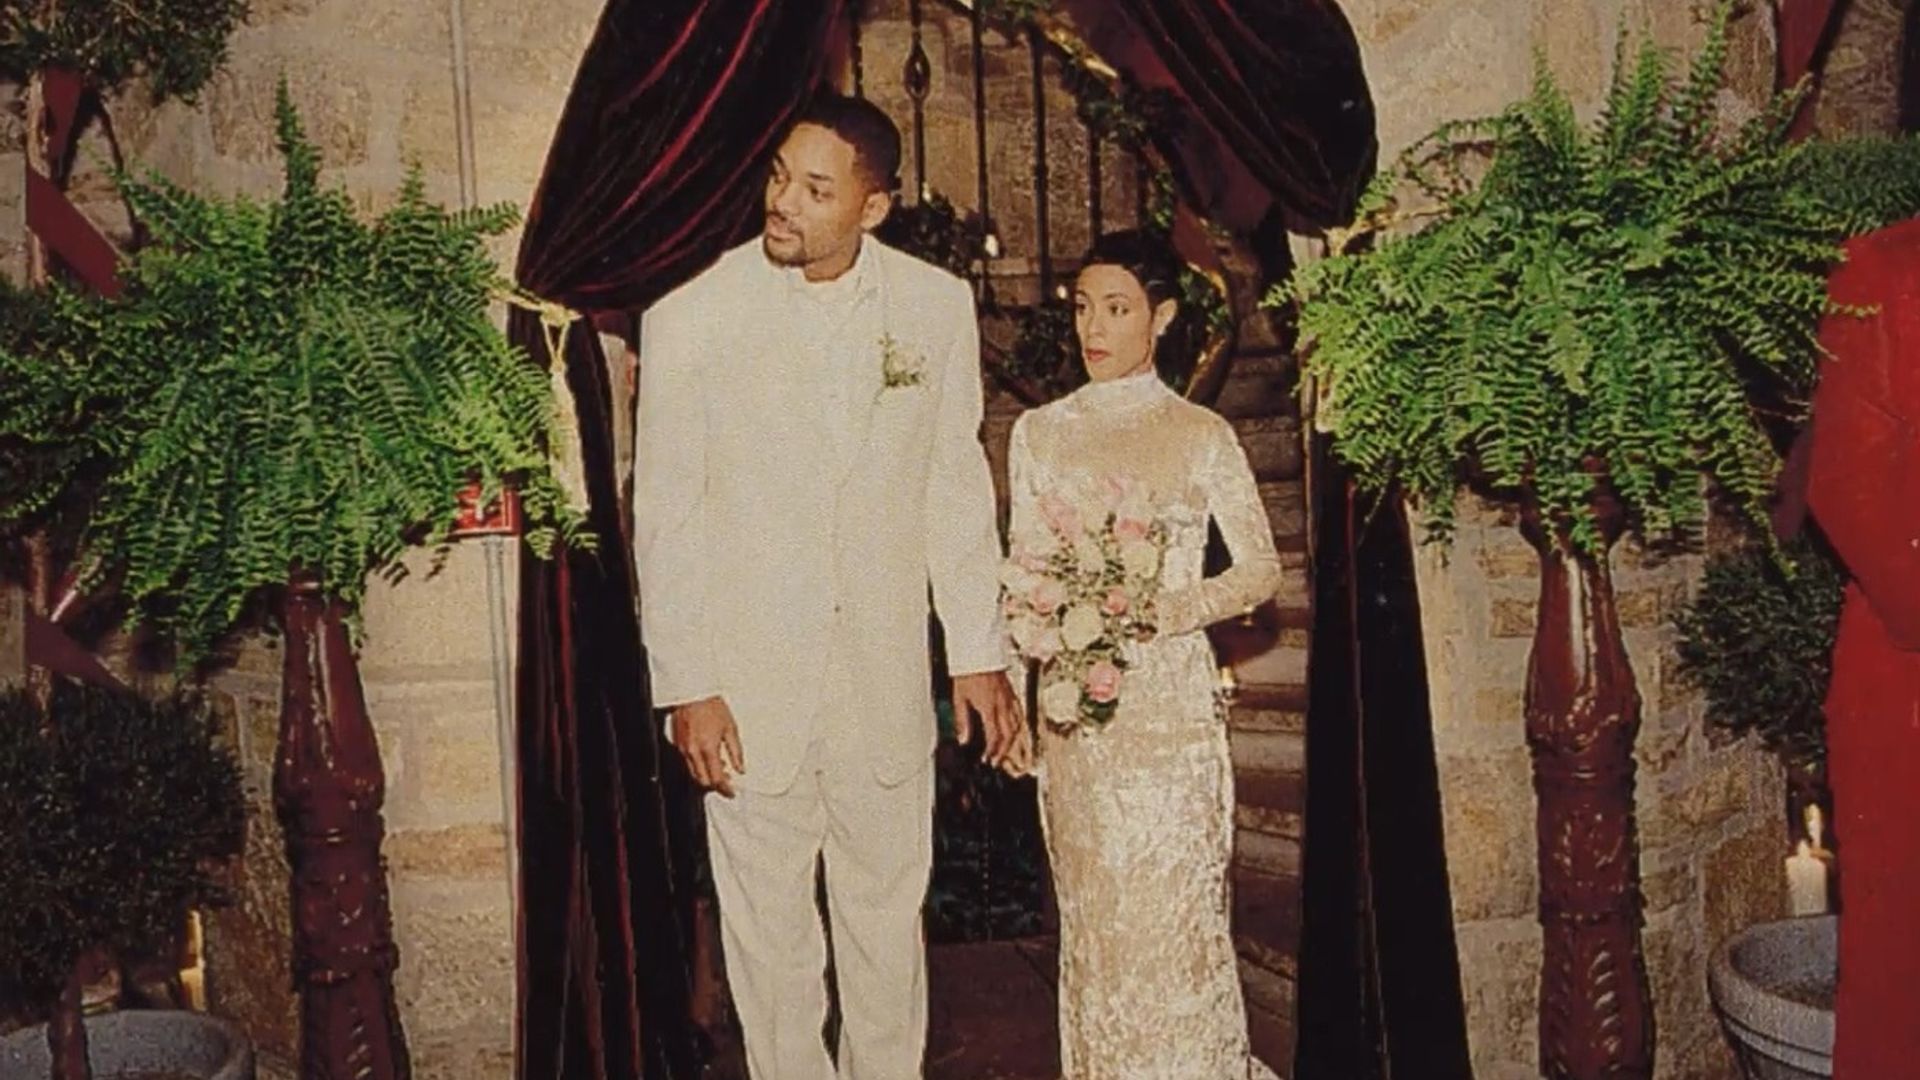 Jada and Will married in 1997